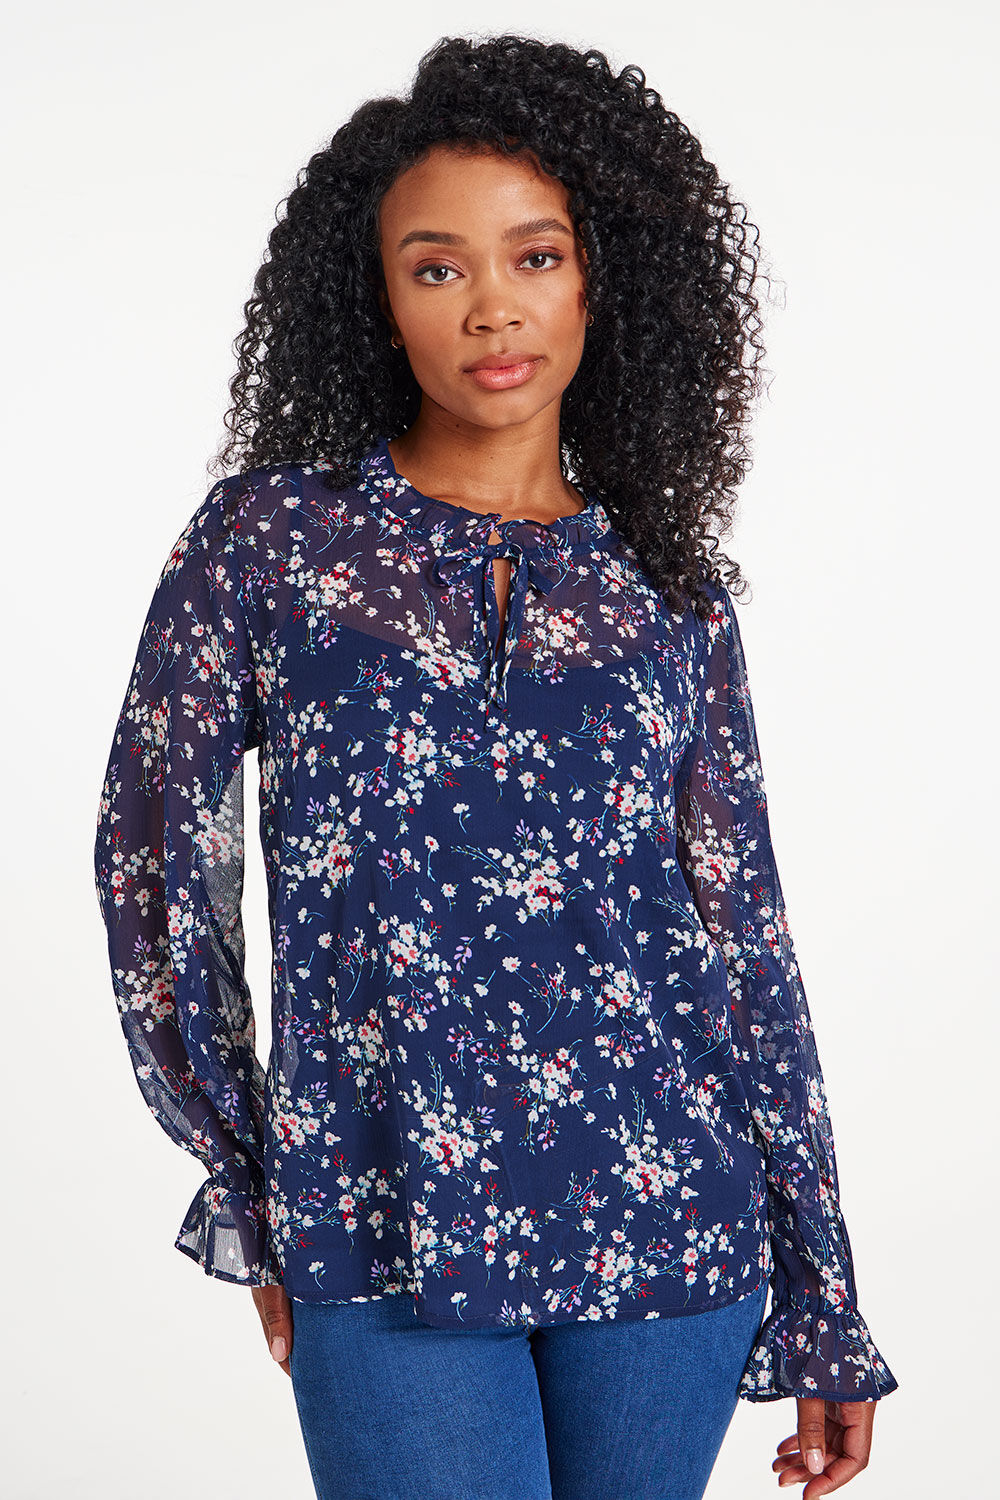 Bonmarche Navy Long Sleeve Floral Overhead Blouse With Cami Top, Size: 18